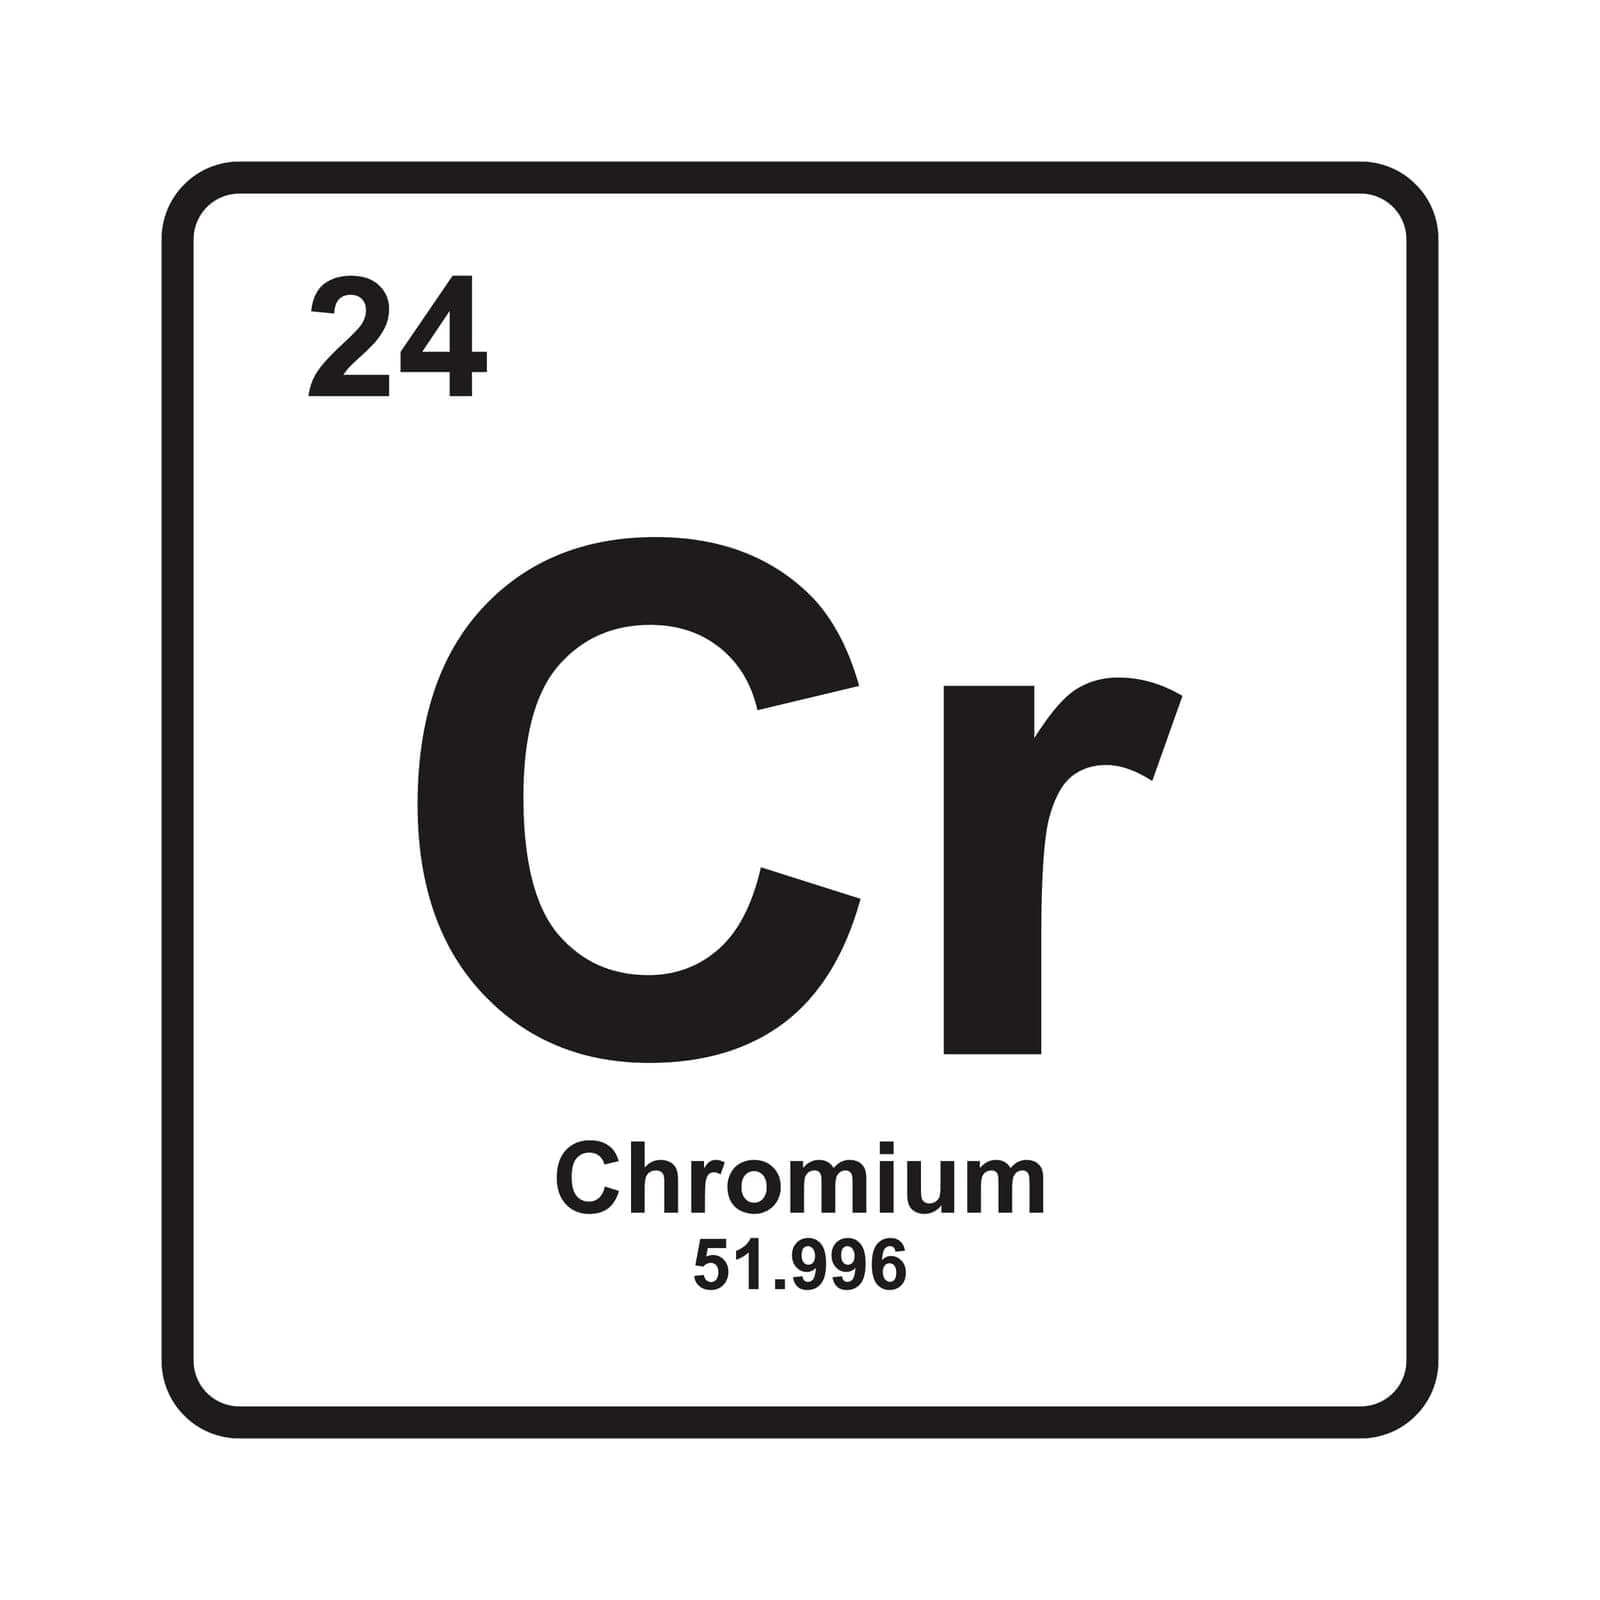 Chromium icon, chemical element in the periodic table.